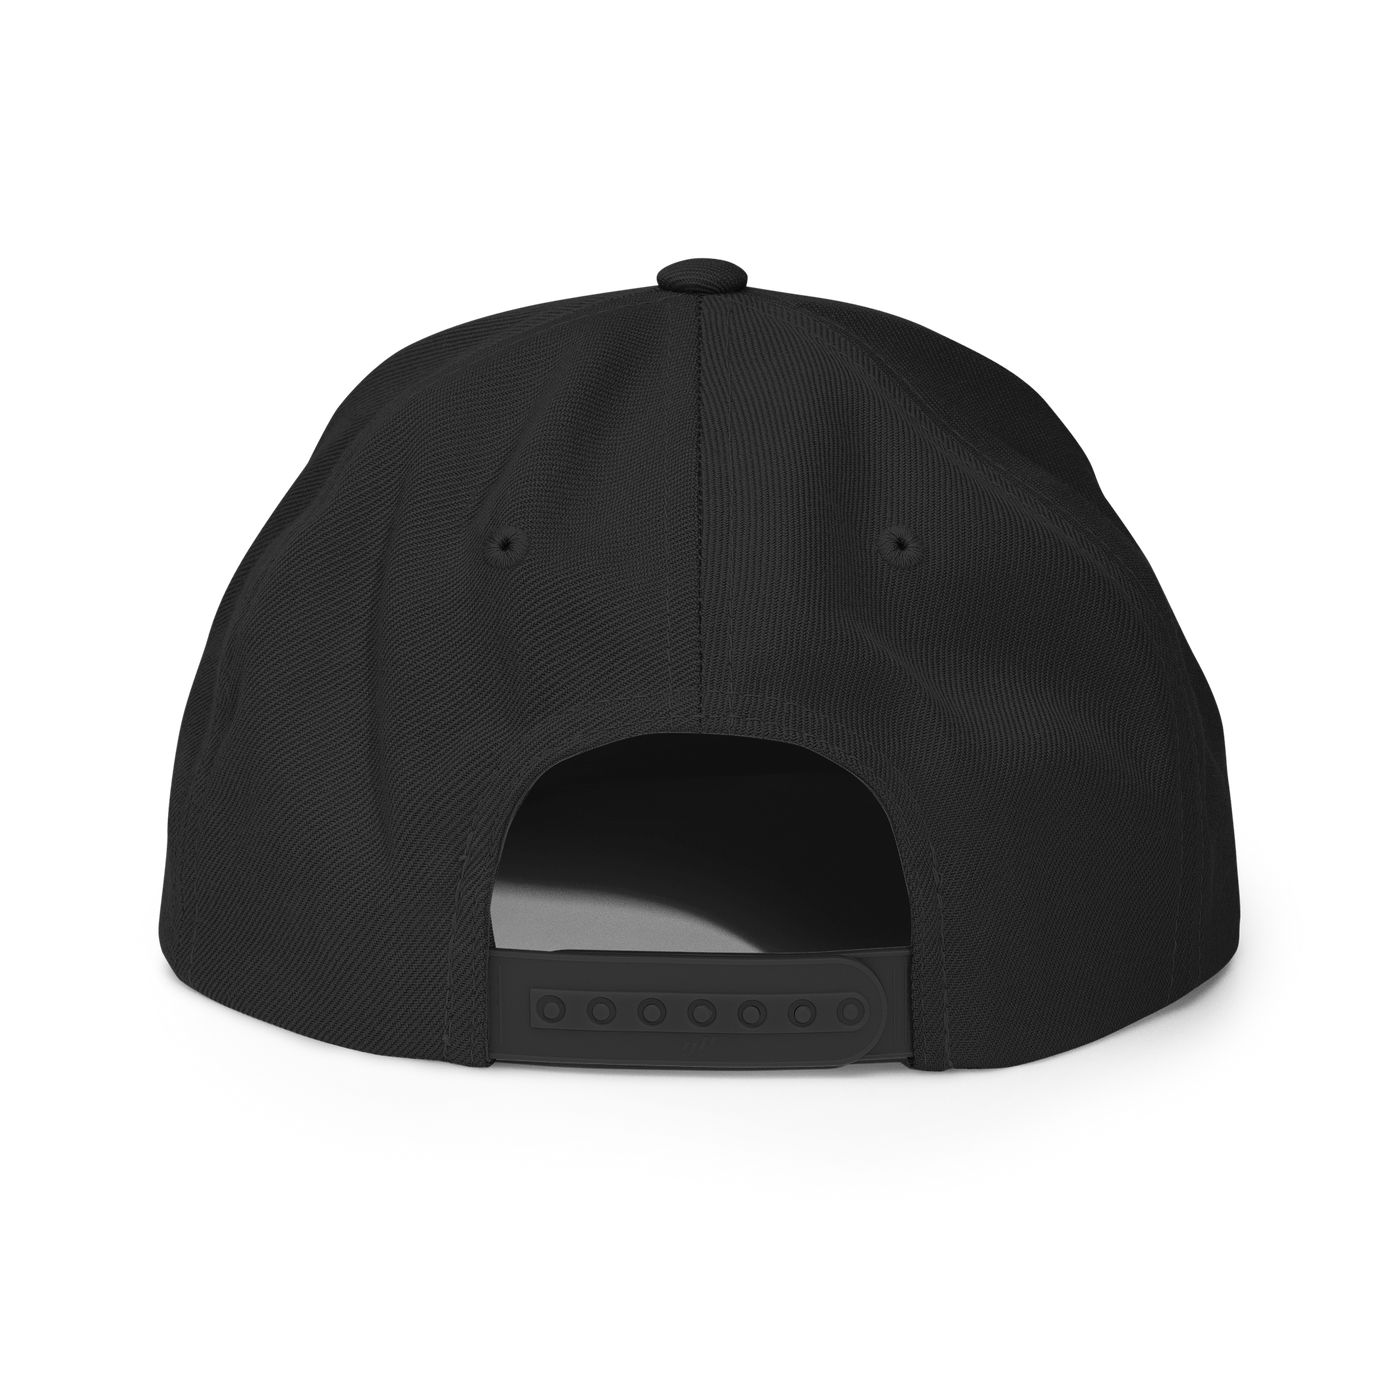 Shit Show Supervisor Snapback - Black - Just Another Cap Store